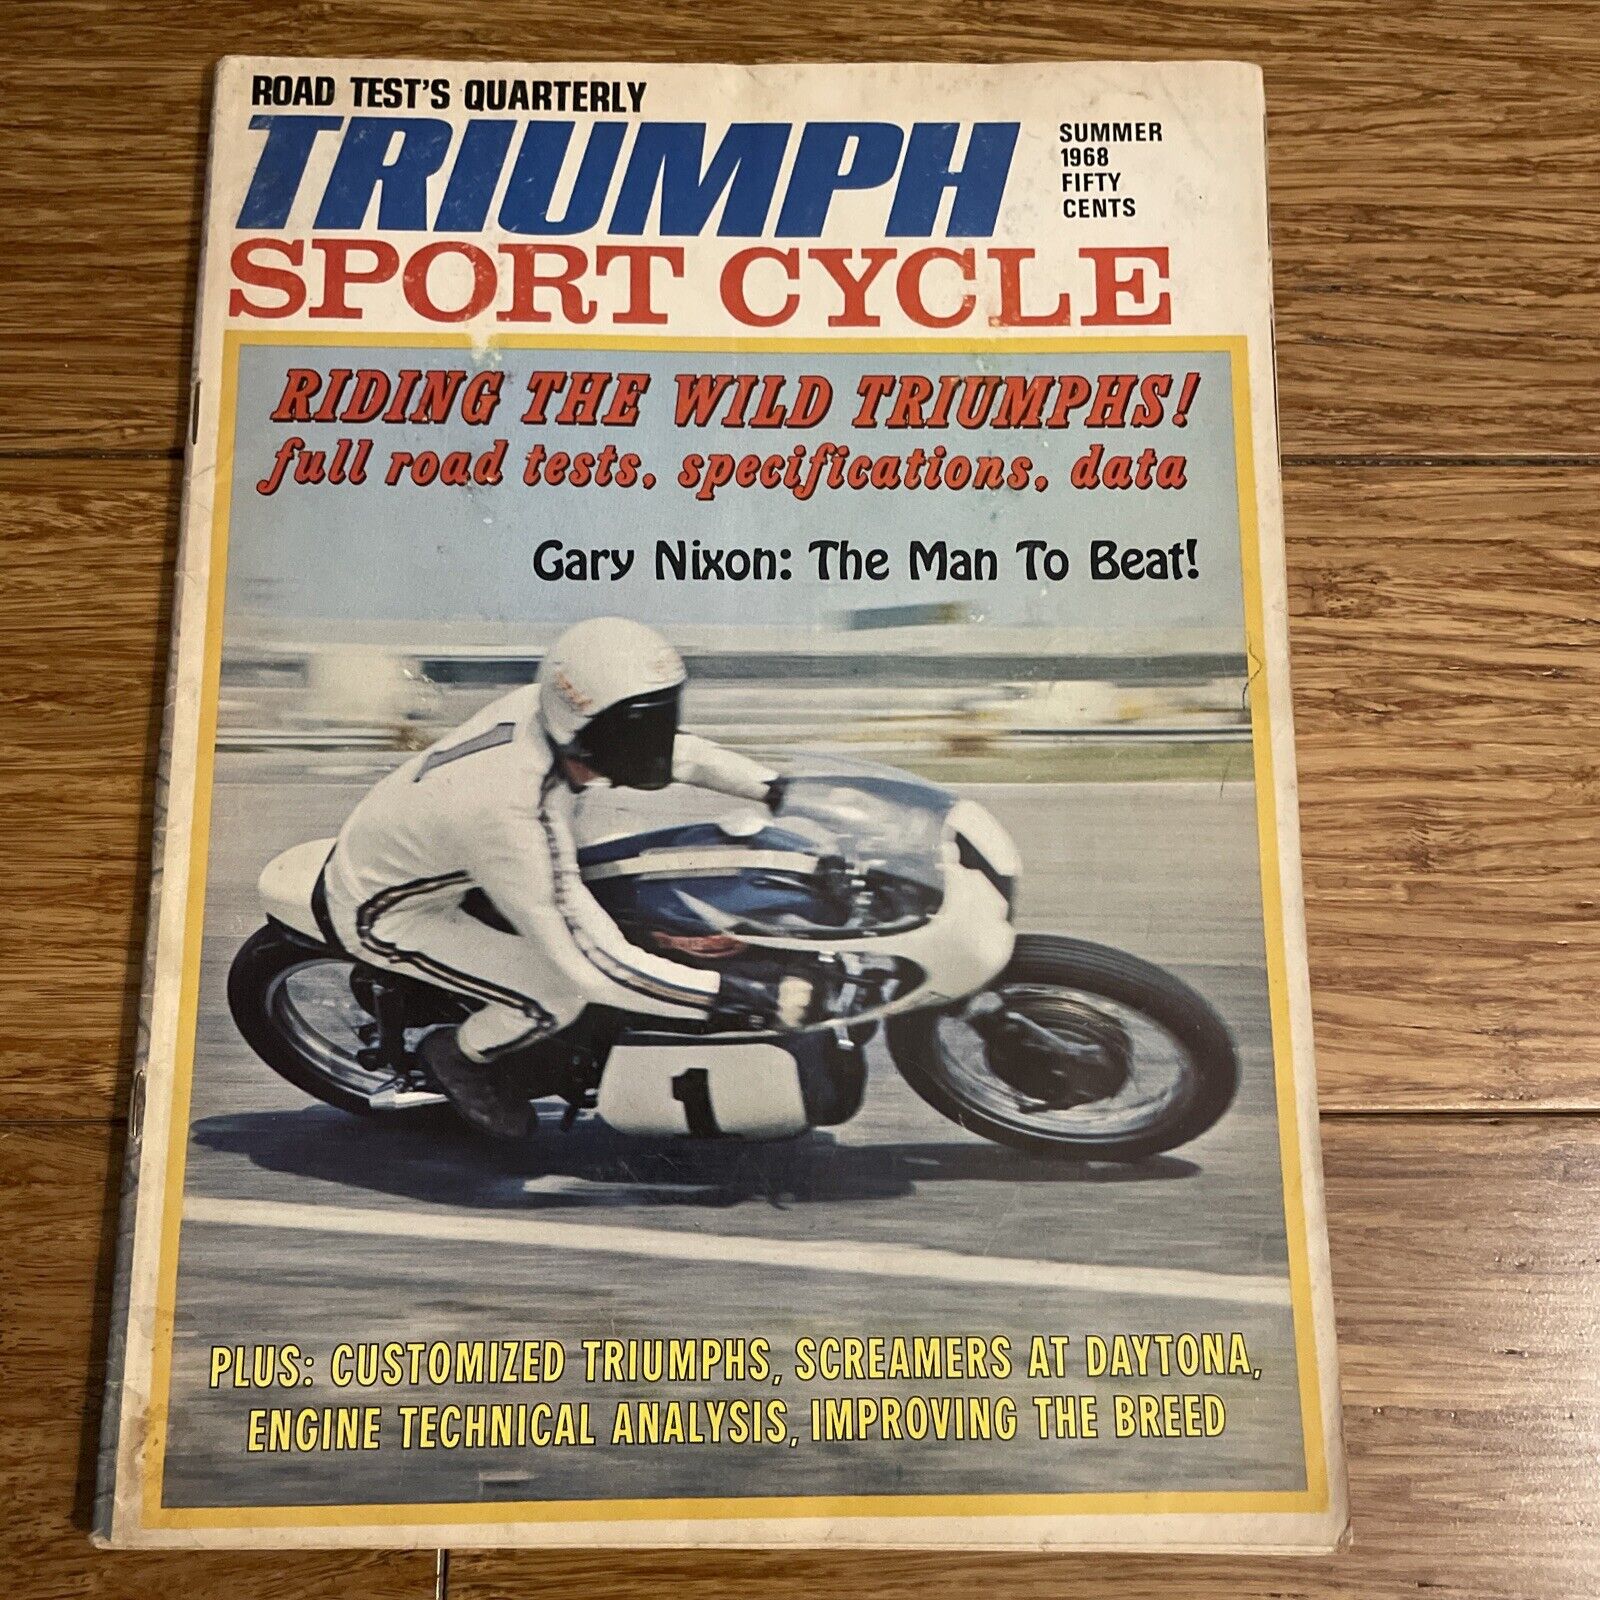 TRIUMPH Sport Cycle Motorcycle Magazine Summer 1968 - Gary Nixon Cover